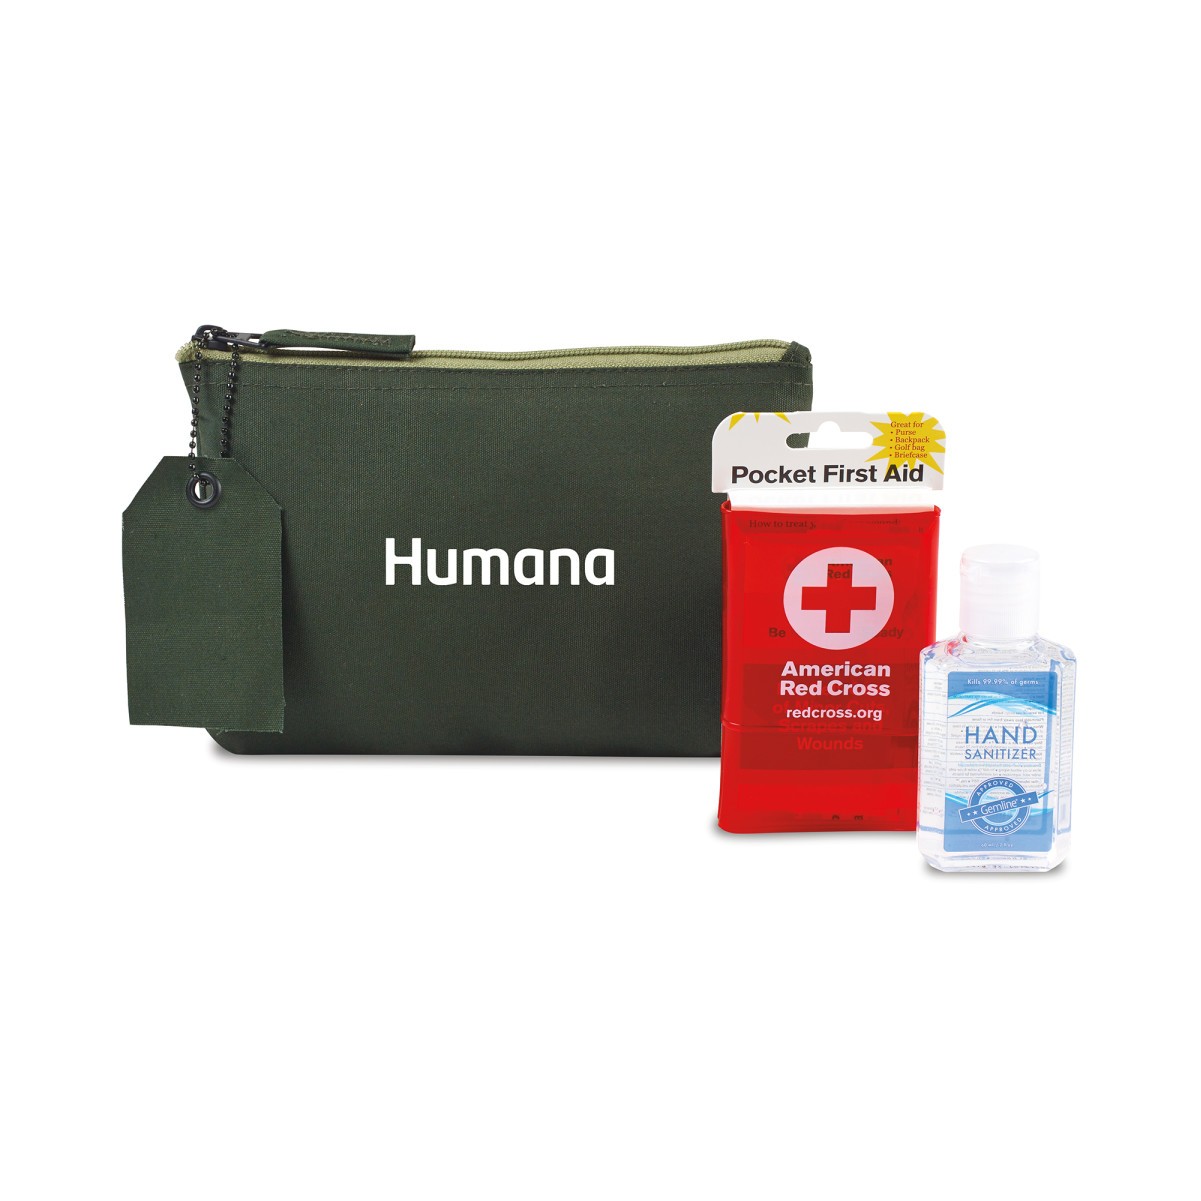 American Red Cross Pocket First Aid and Hand Sanitizer ...